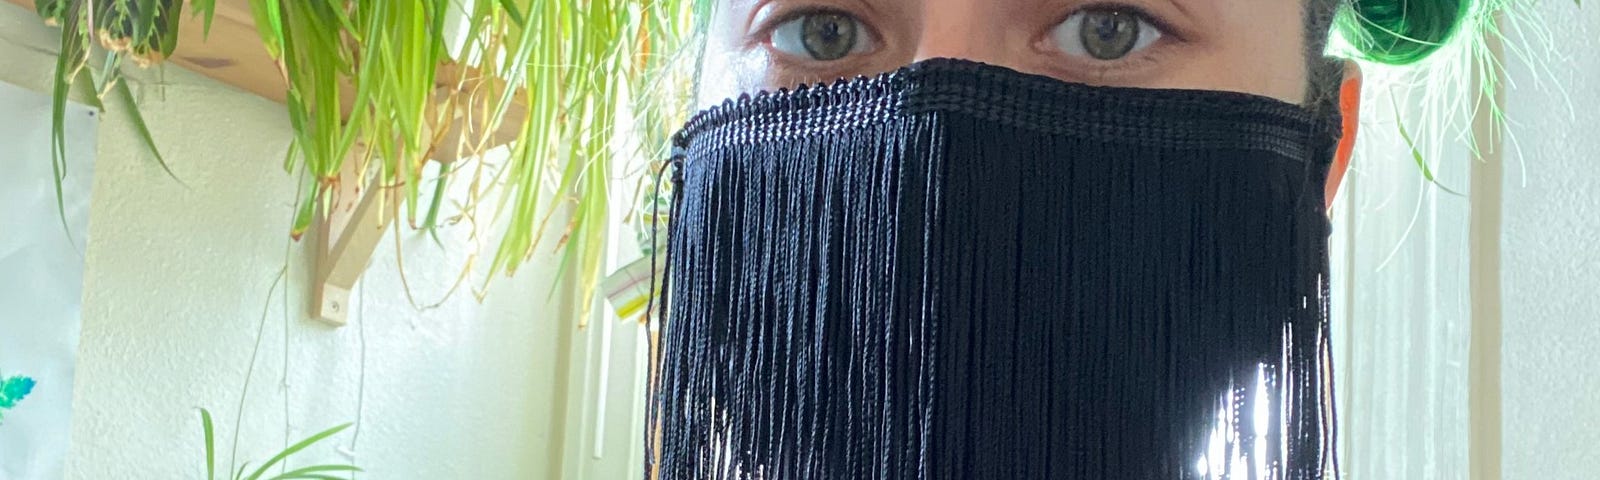 Meet the Fringe Mask—and the San Francisco Maker Behind This Iconic  Pandemic Look, by Clara Hogan